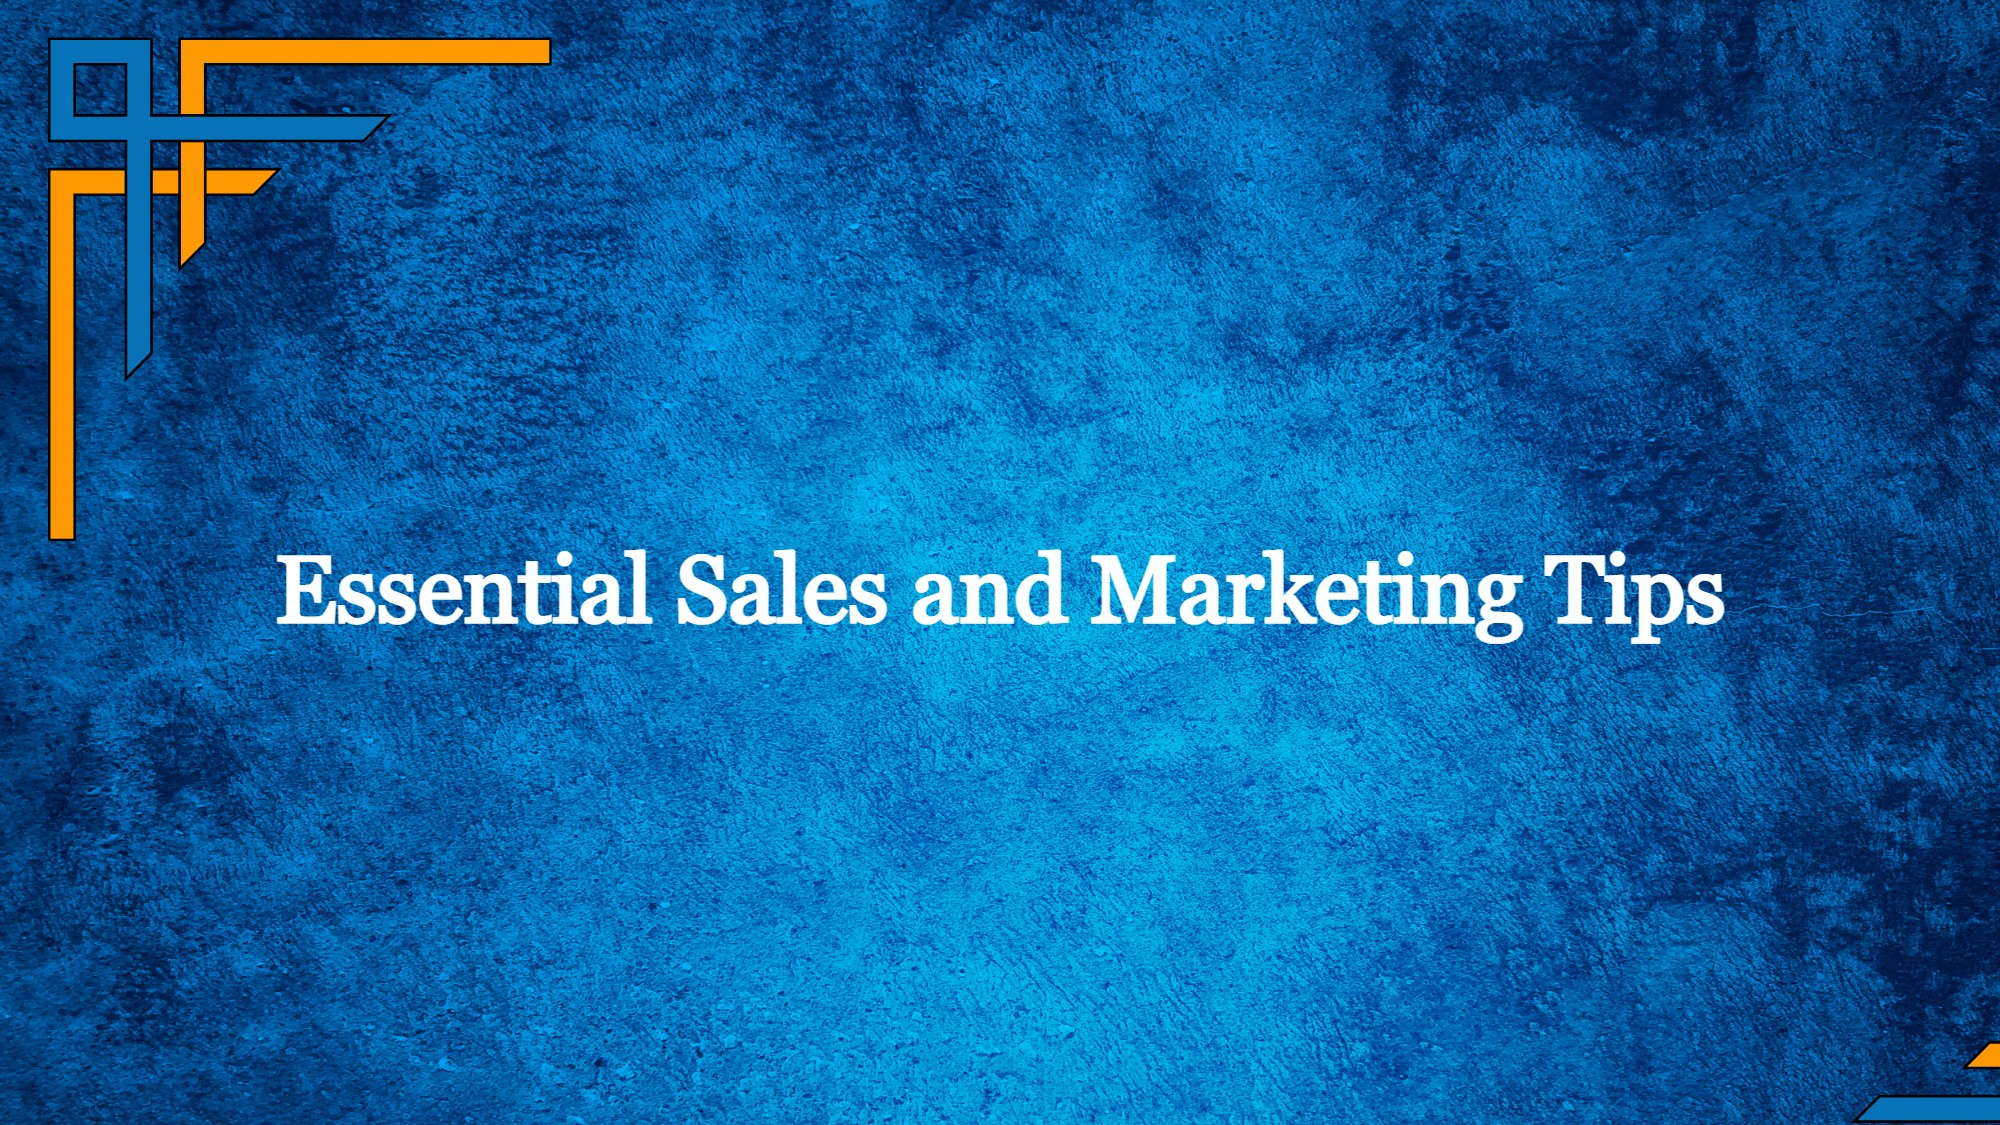 10 Essential Sales and Marketing Tips for Startups